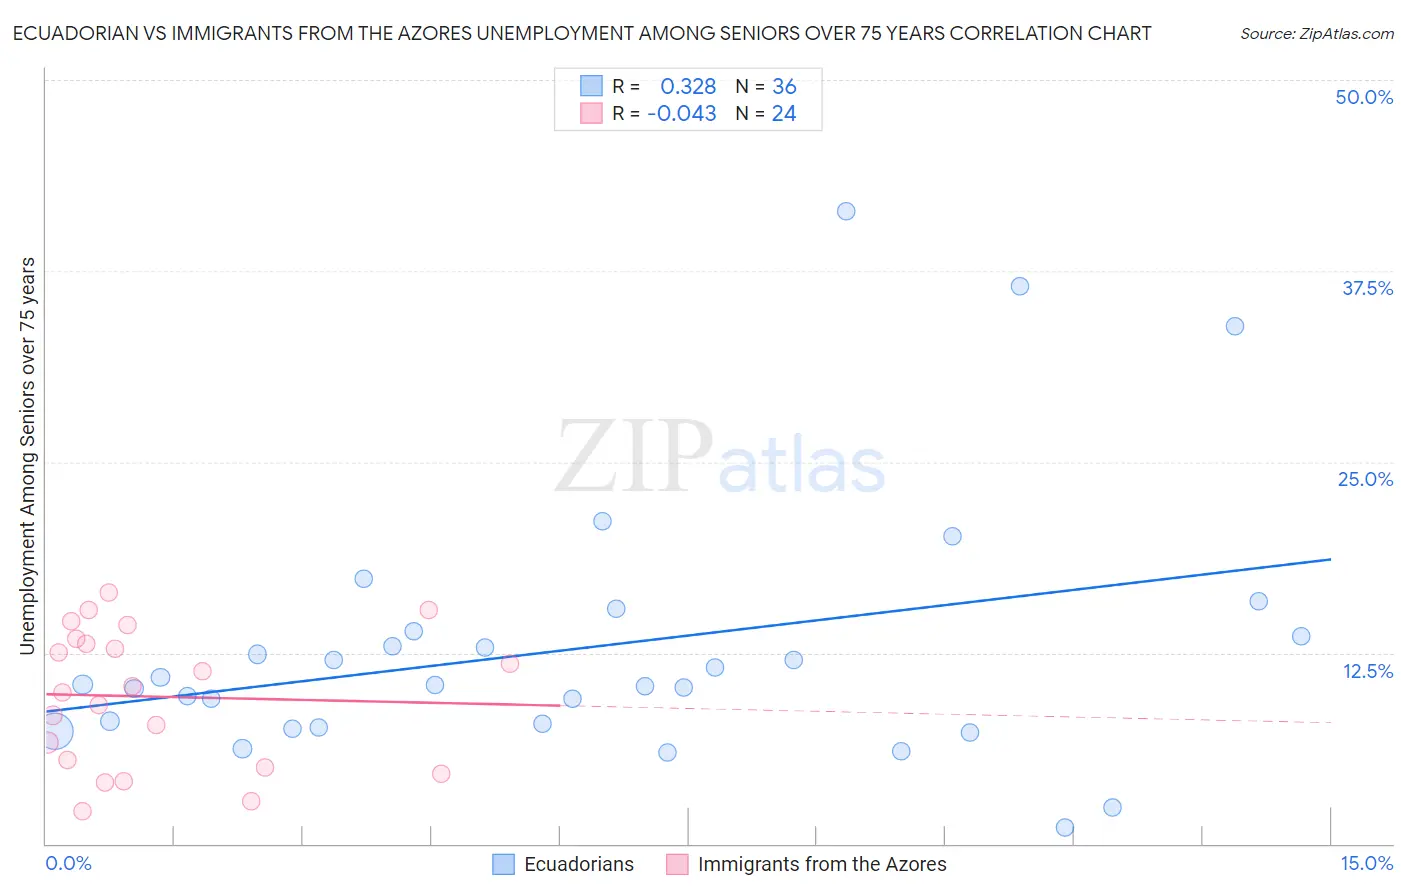 Ecuadorian vs Immigrants from the Azores Unemployment Among Seniors over 75 years